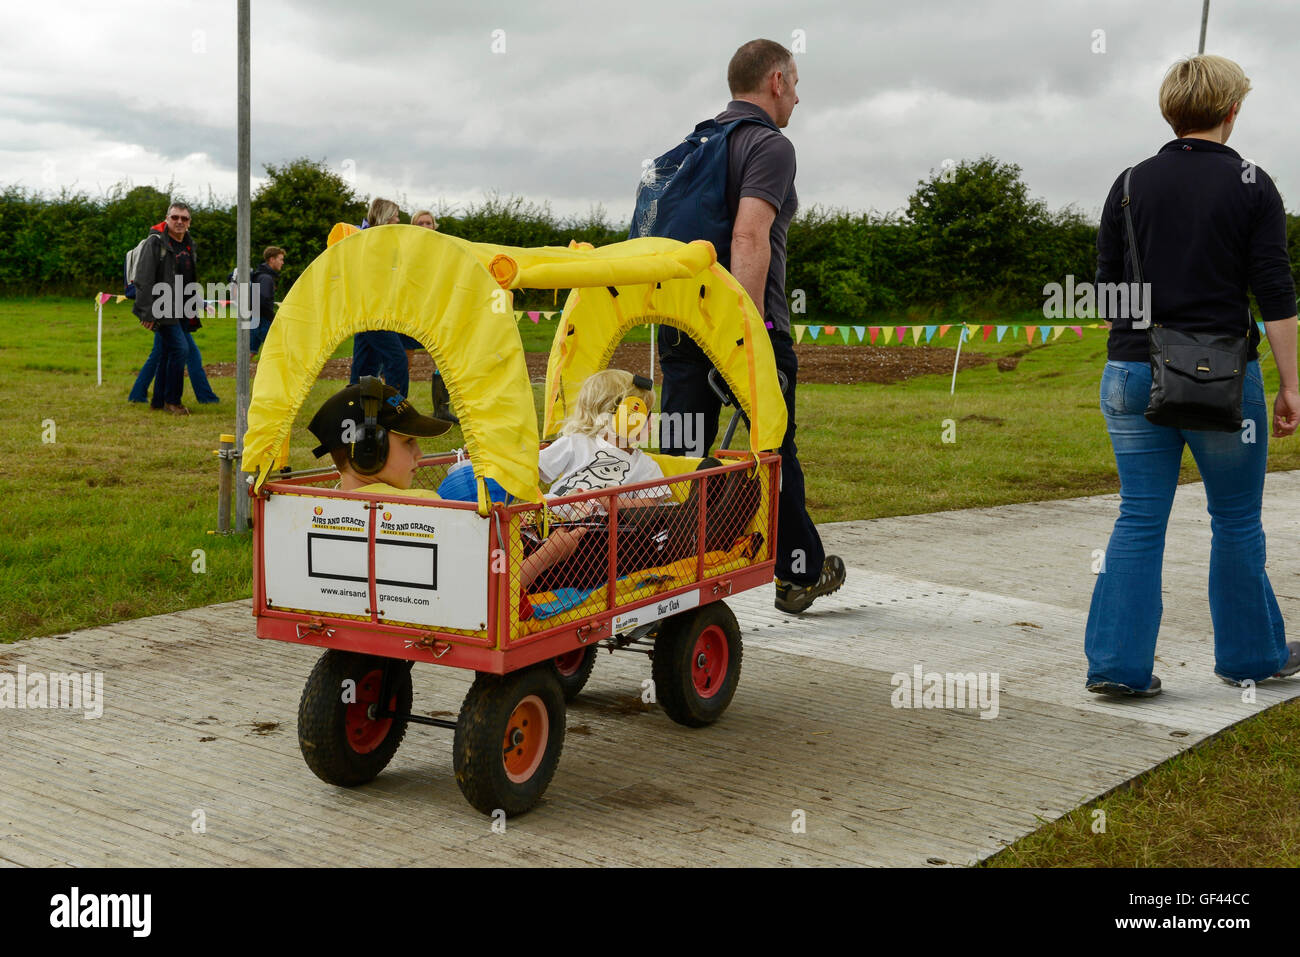 Carfest North, Bolesworth, Cheshire, UK. 29th July, 2016. Two children are transported around the site in the back of a trolley. The event is the brainchild of Chris Evans and features 3 days of cars, music and entertainment with profits being donated to the charity Children in Need. Credit:  Andrew Paterson/Alamy Live News Stock Photo